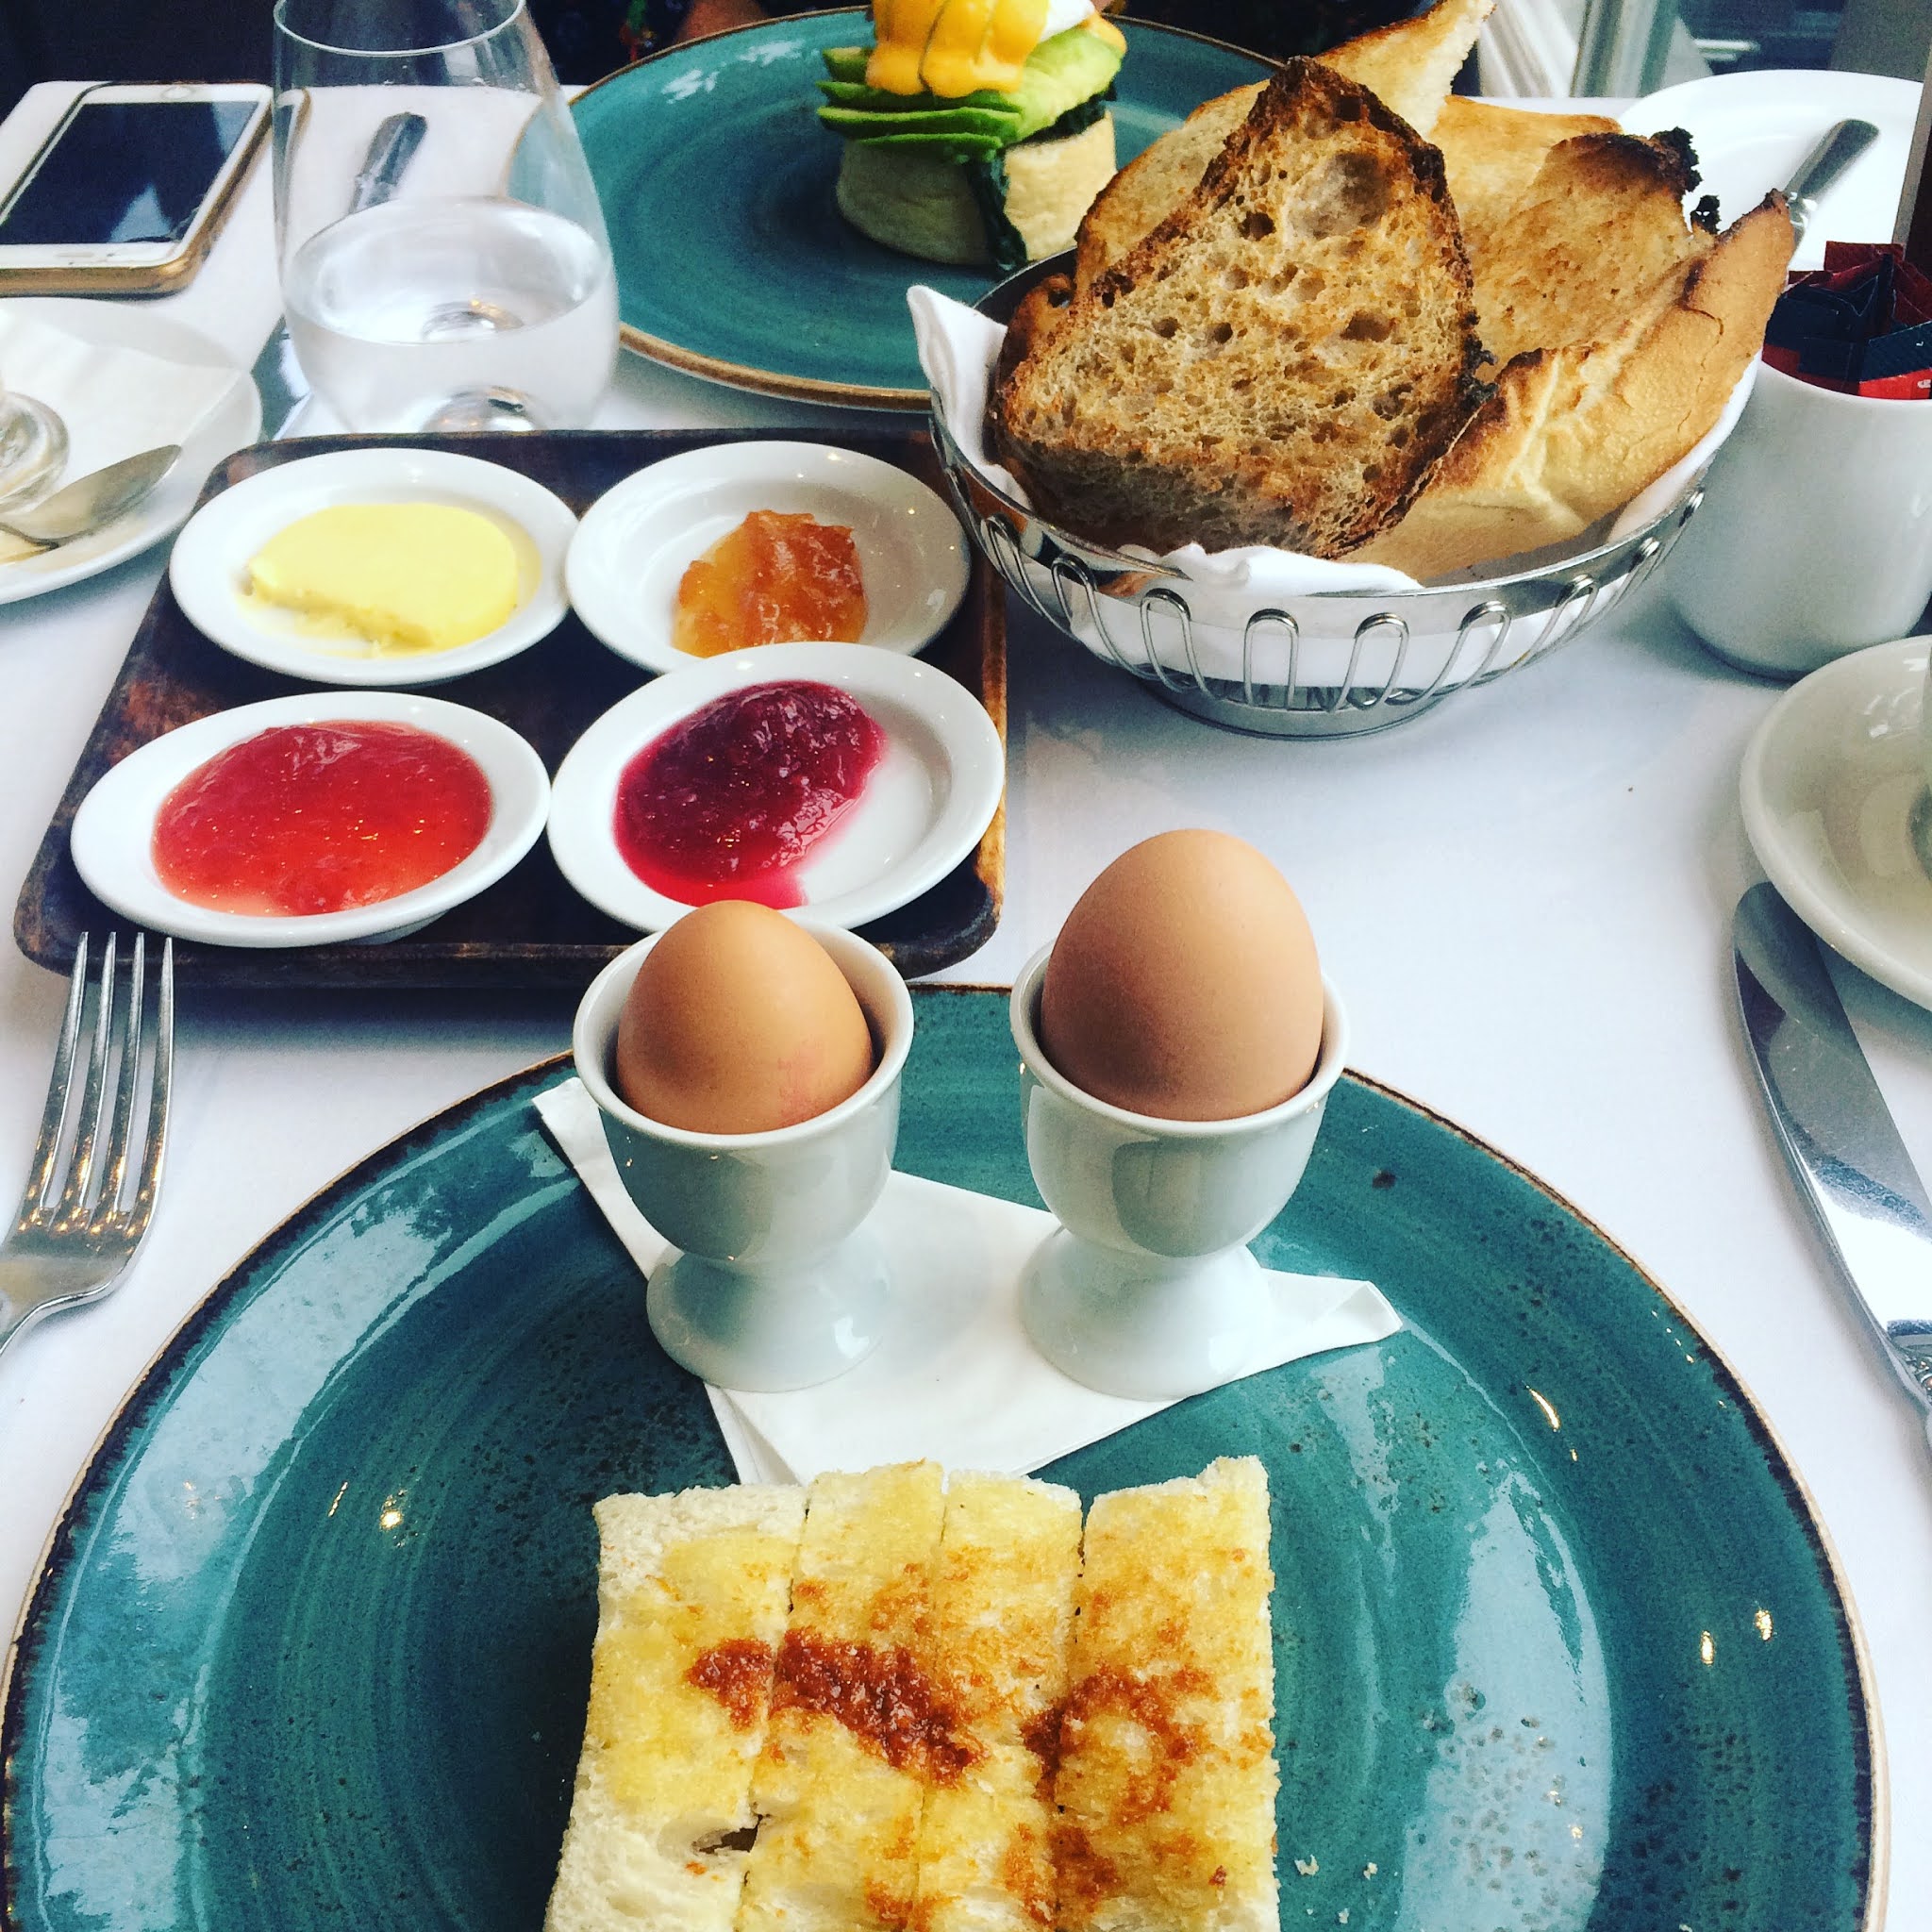 Boiled eggs with marmite soldiers at Roast, one of the best brunch places in London Bridge